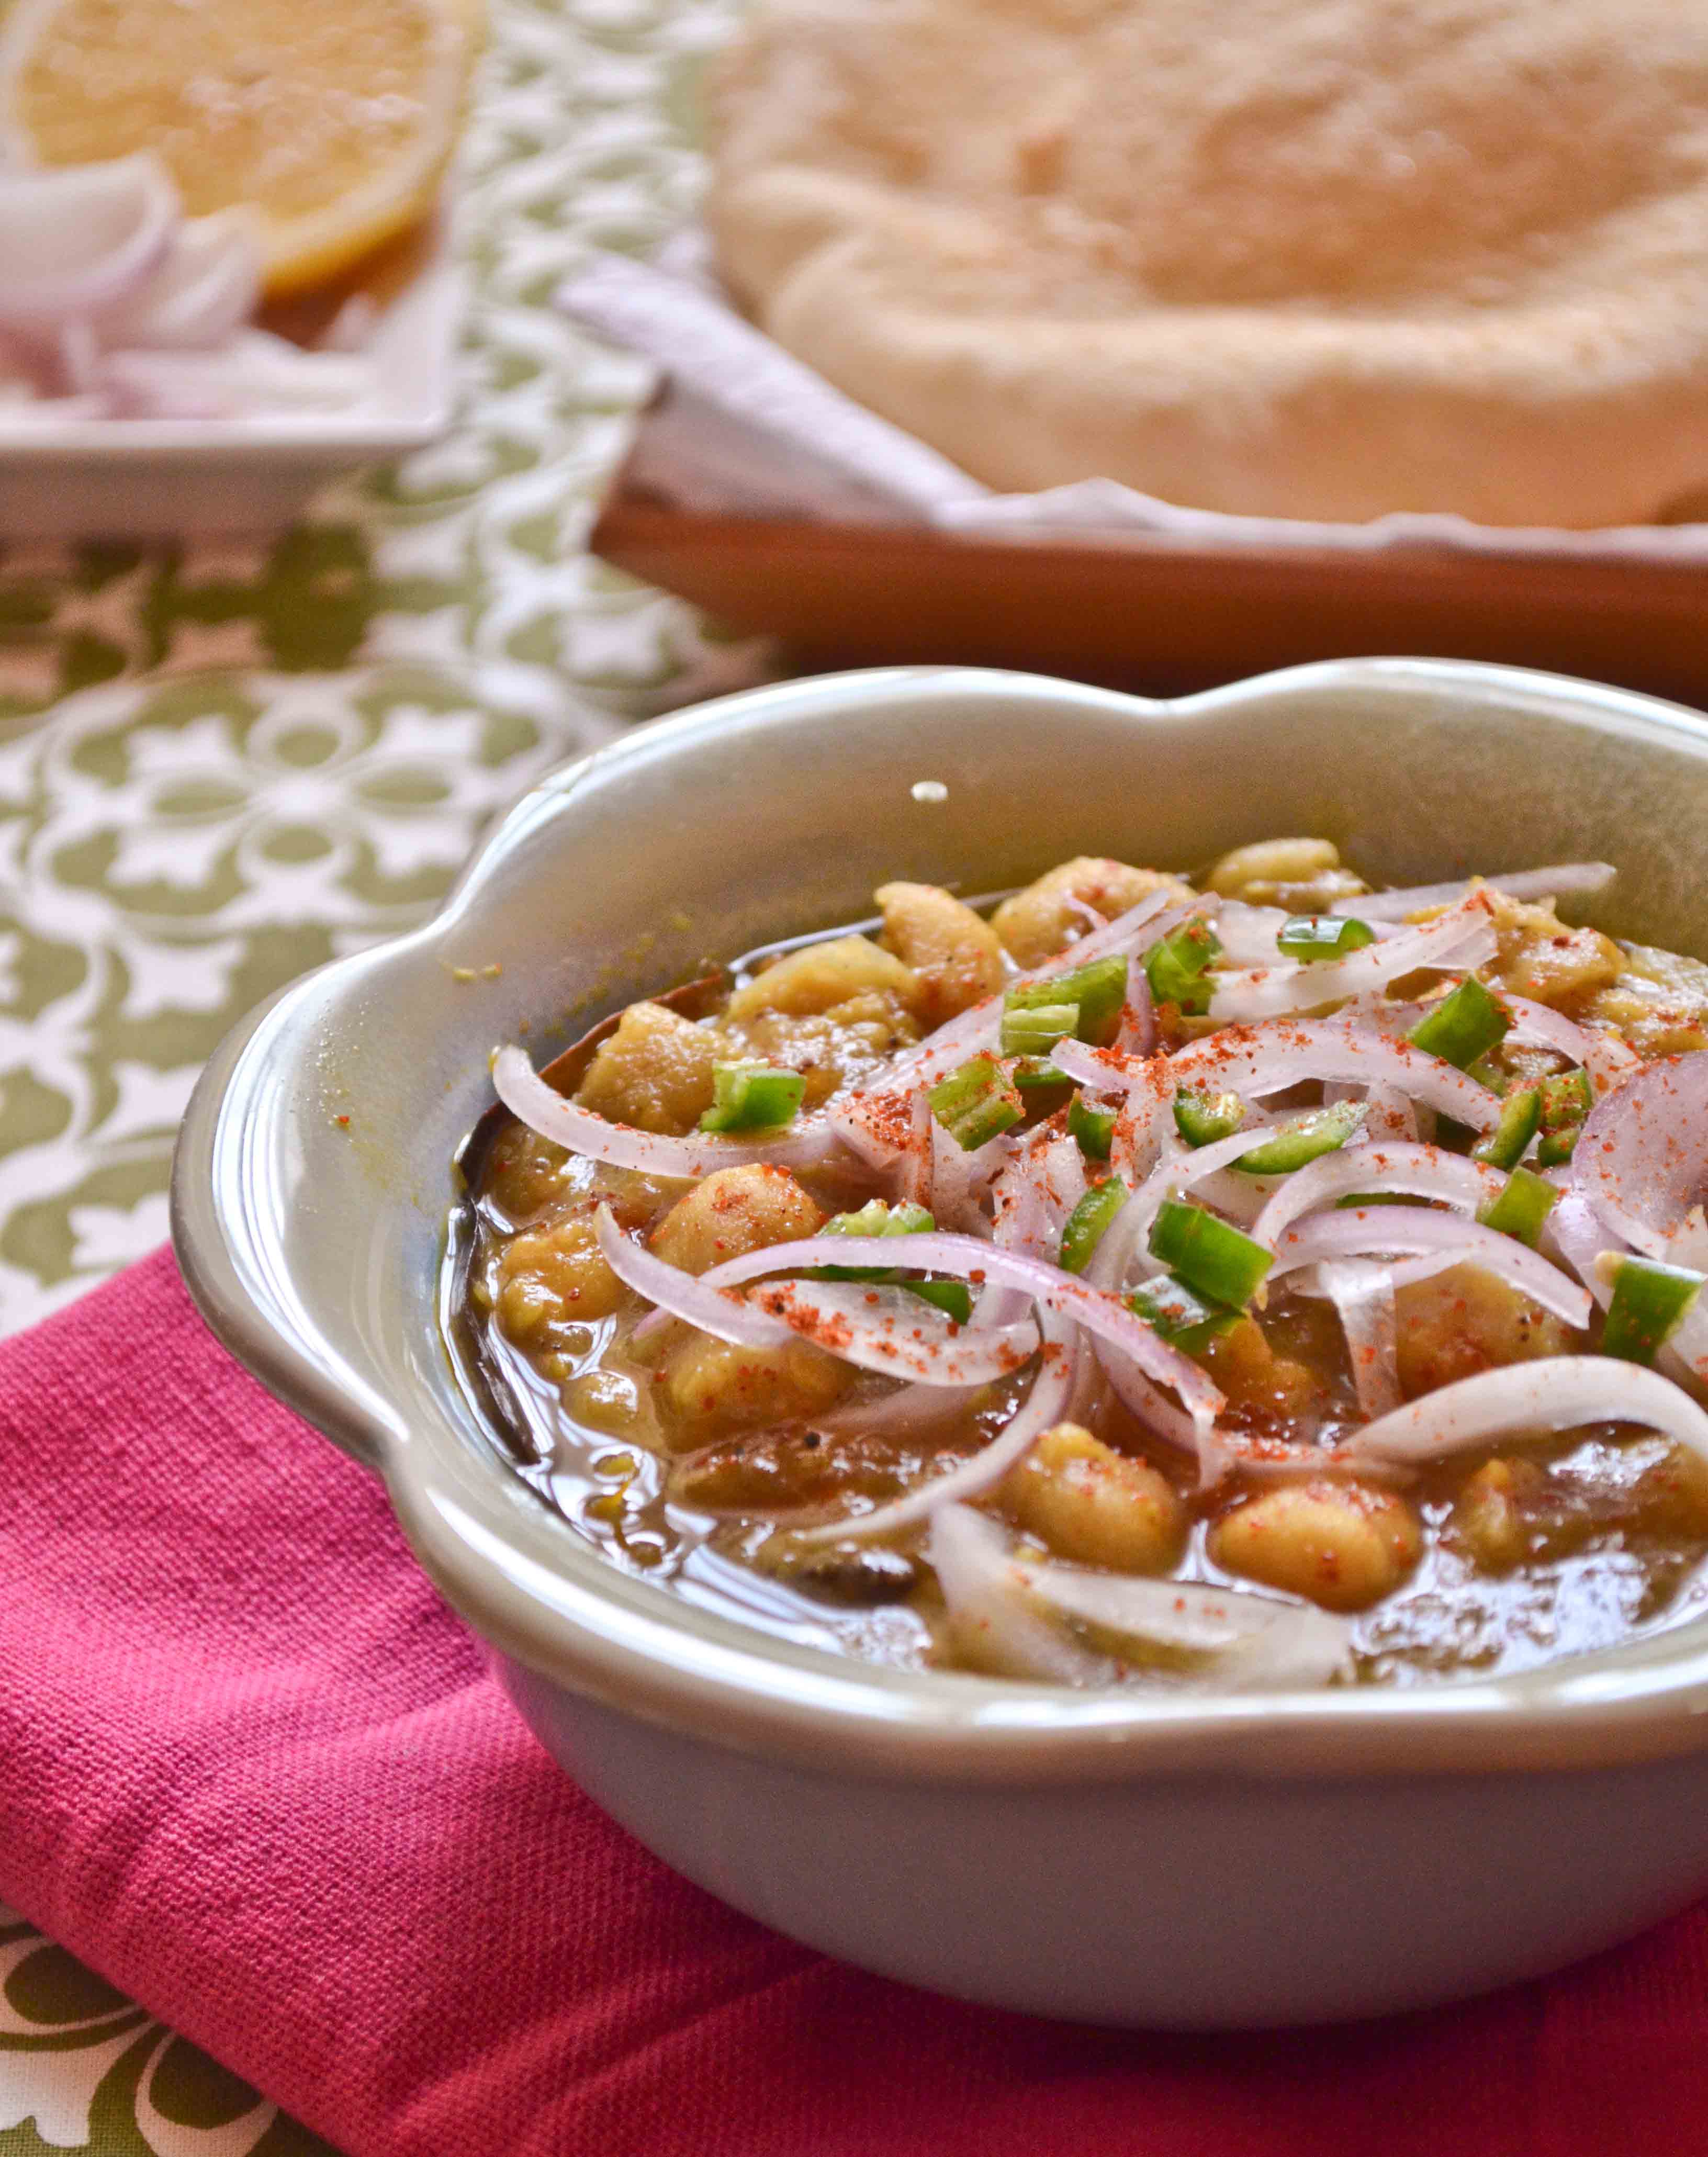 20120721 DSC 0590 The Best Chole Bhature Recipe : Authentic, Fluffy, & Flavorful